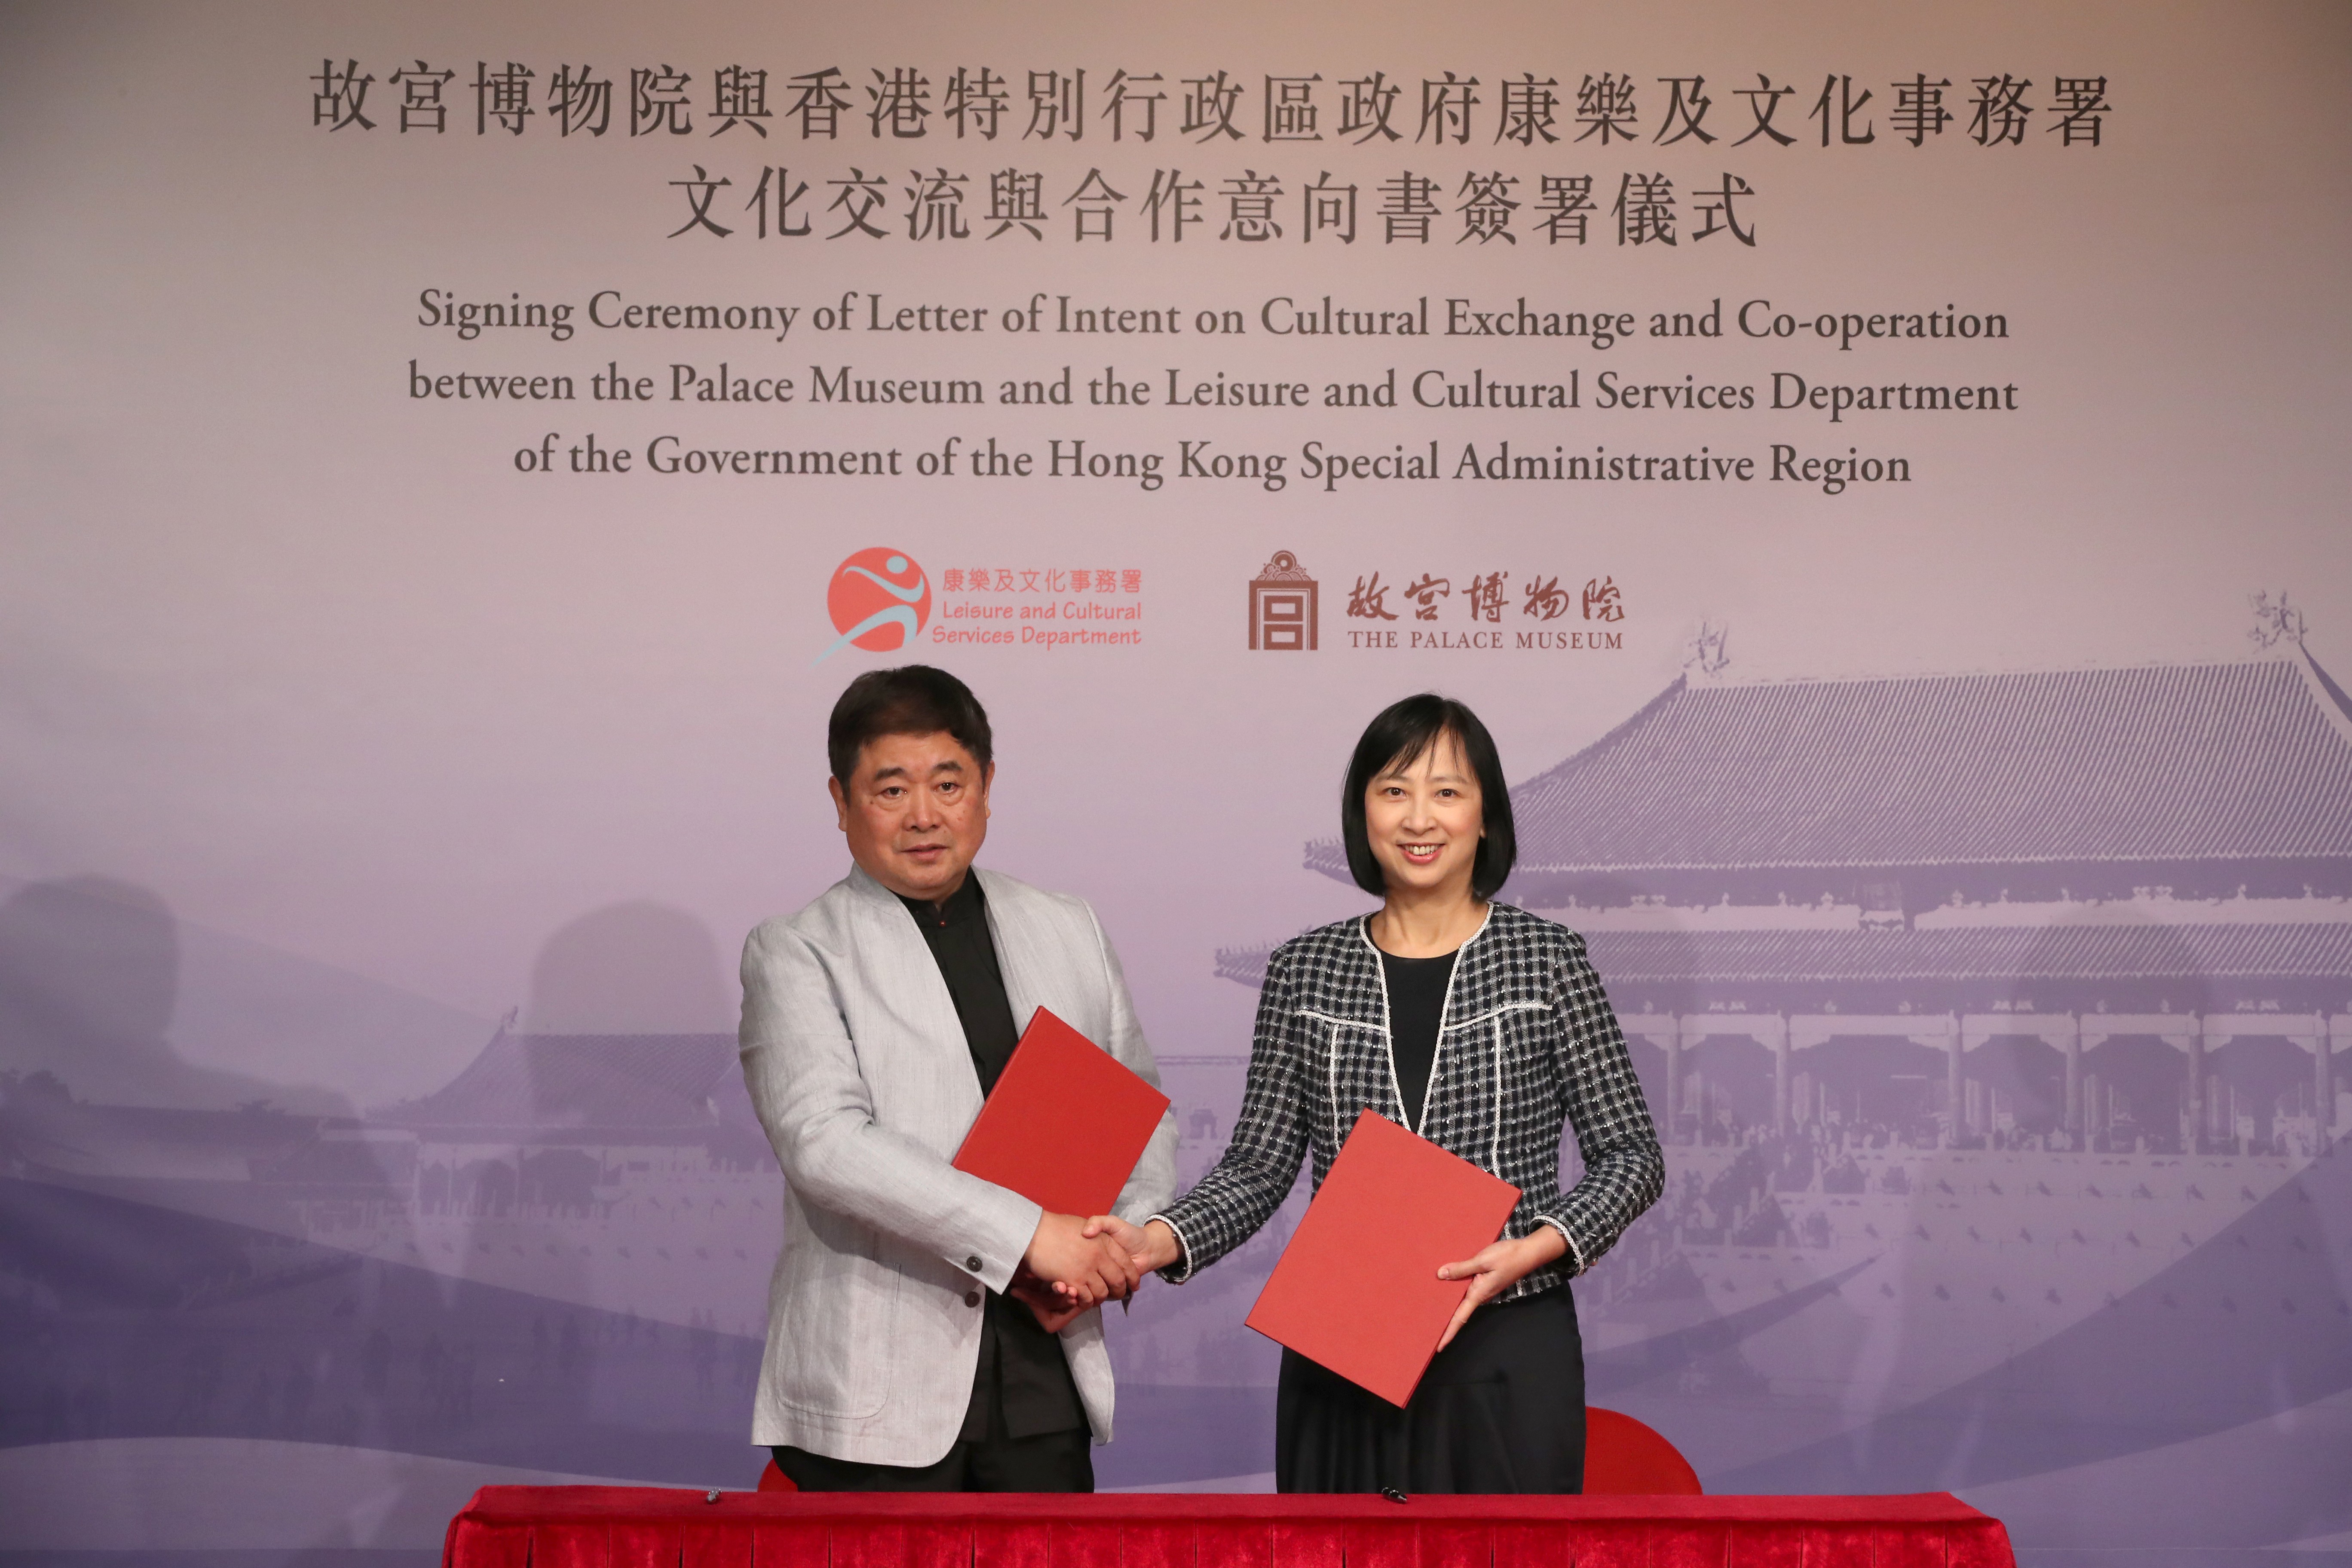 Dr Shan Jixiang (left), director of the Palace Museum and Michelle Li Mei-sheung, director of leisure and cultural Services, at the signing of a second letter of intent on cultural exchange and co-operation. Photo: Edward Wong